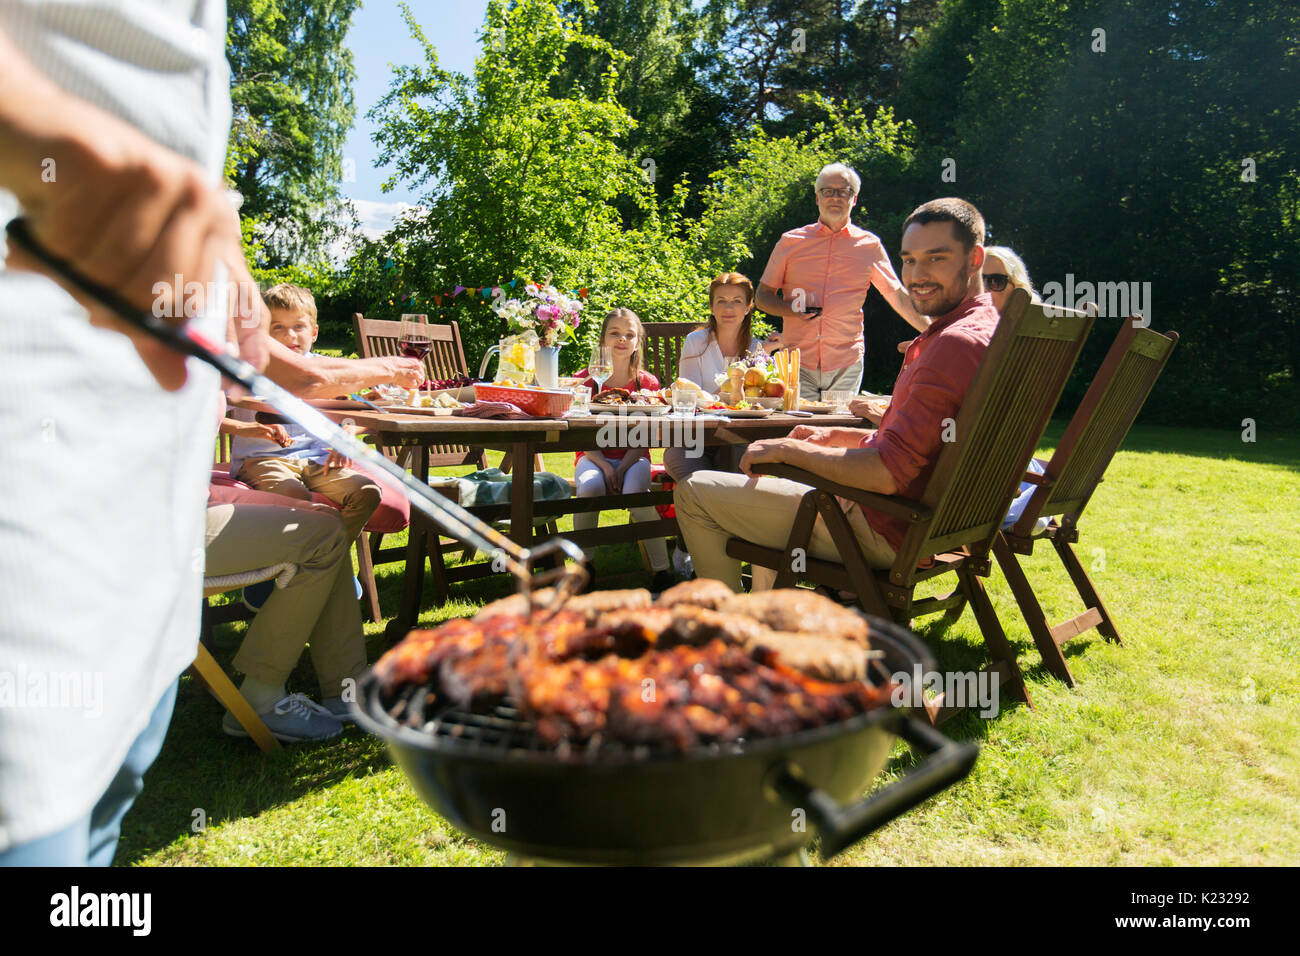 Vermindering Ontrouw Microbe man cooking meat on barbecue grill at summer party Stock Photo - Alamy